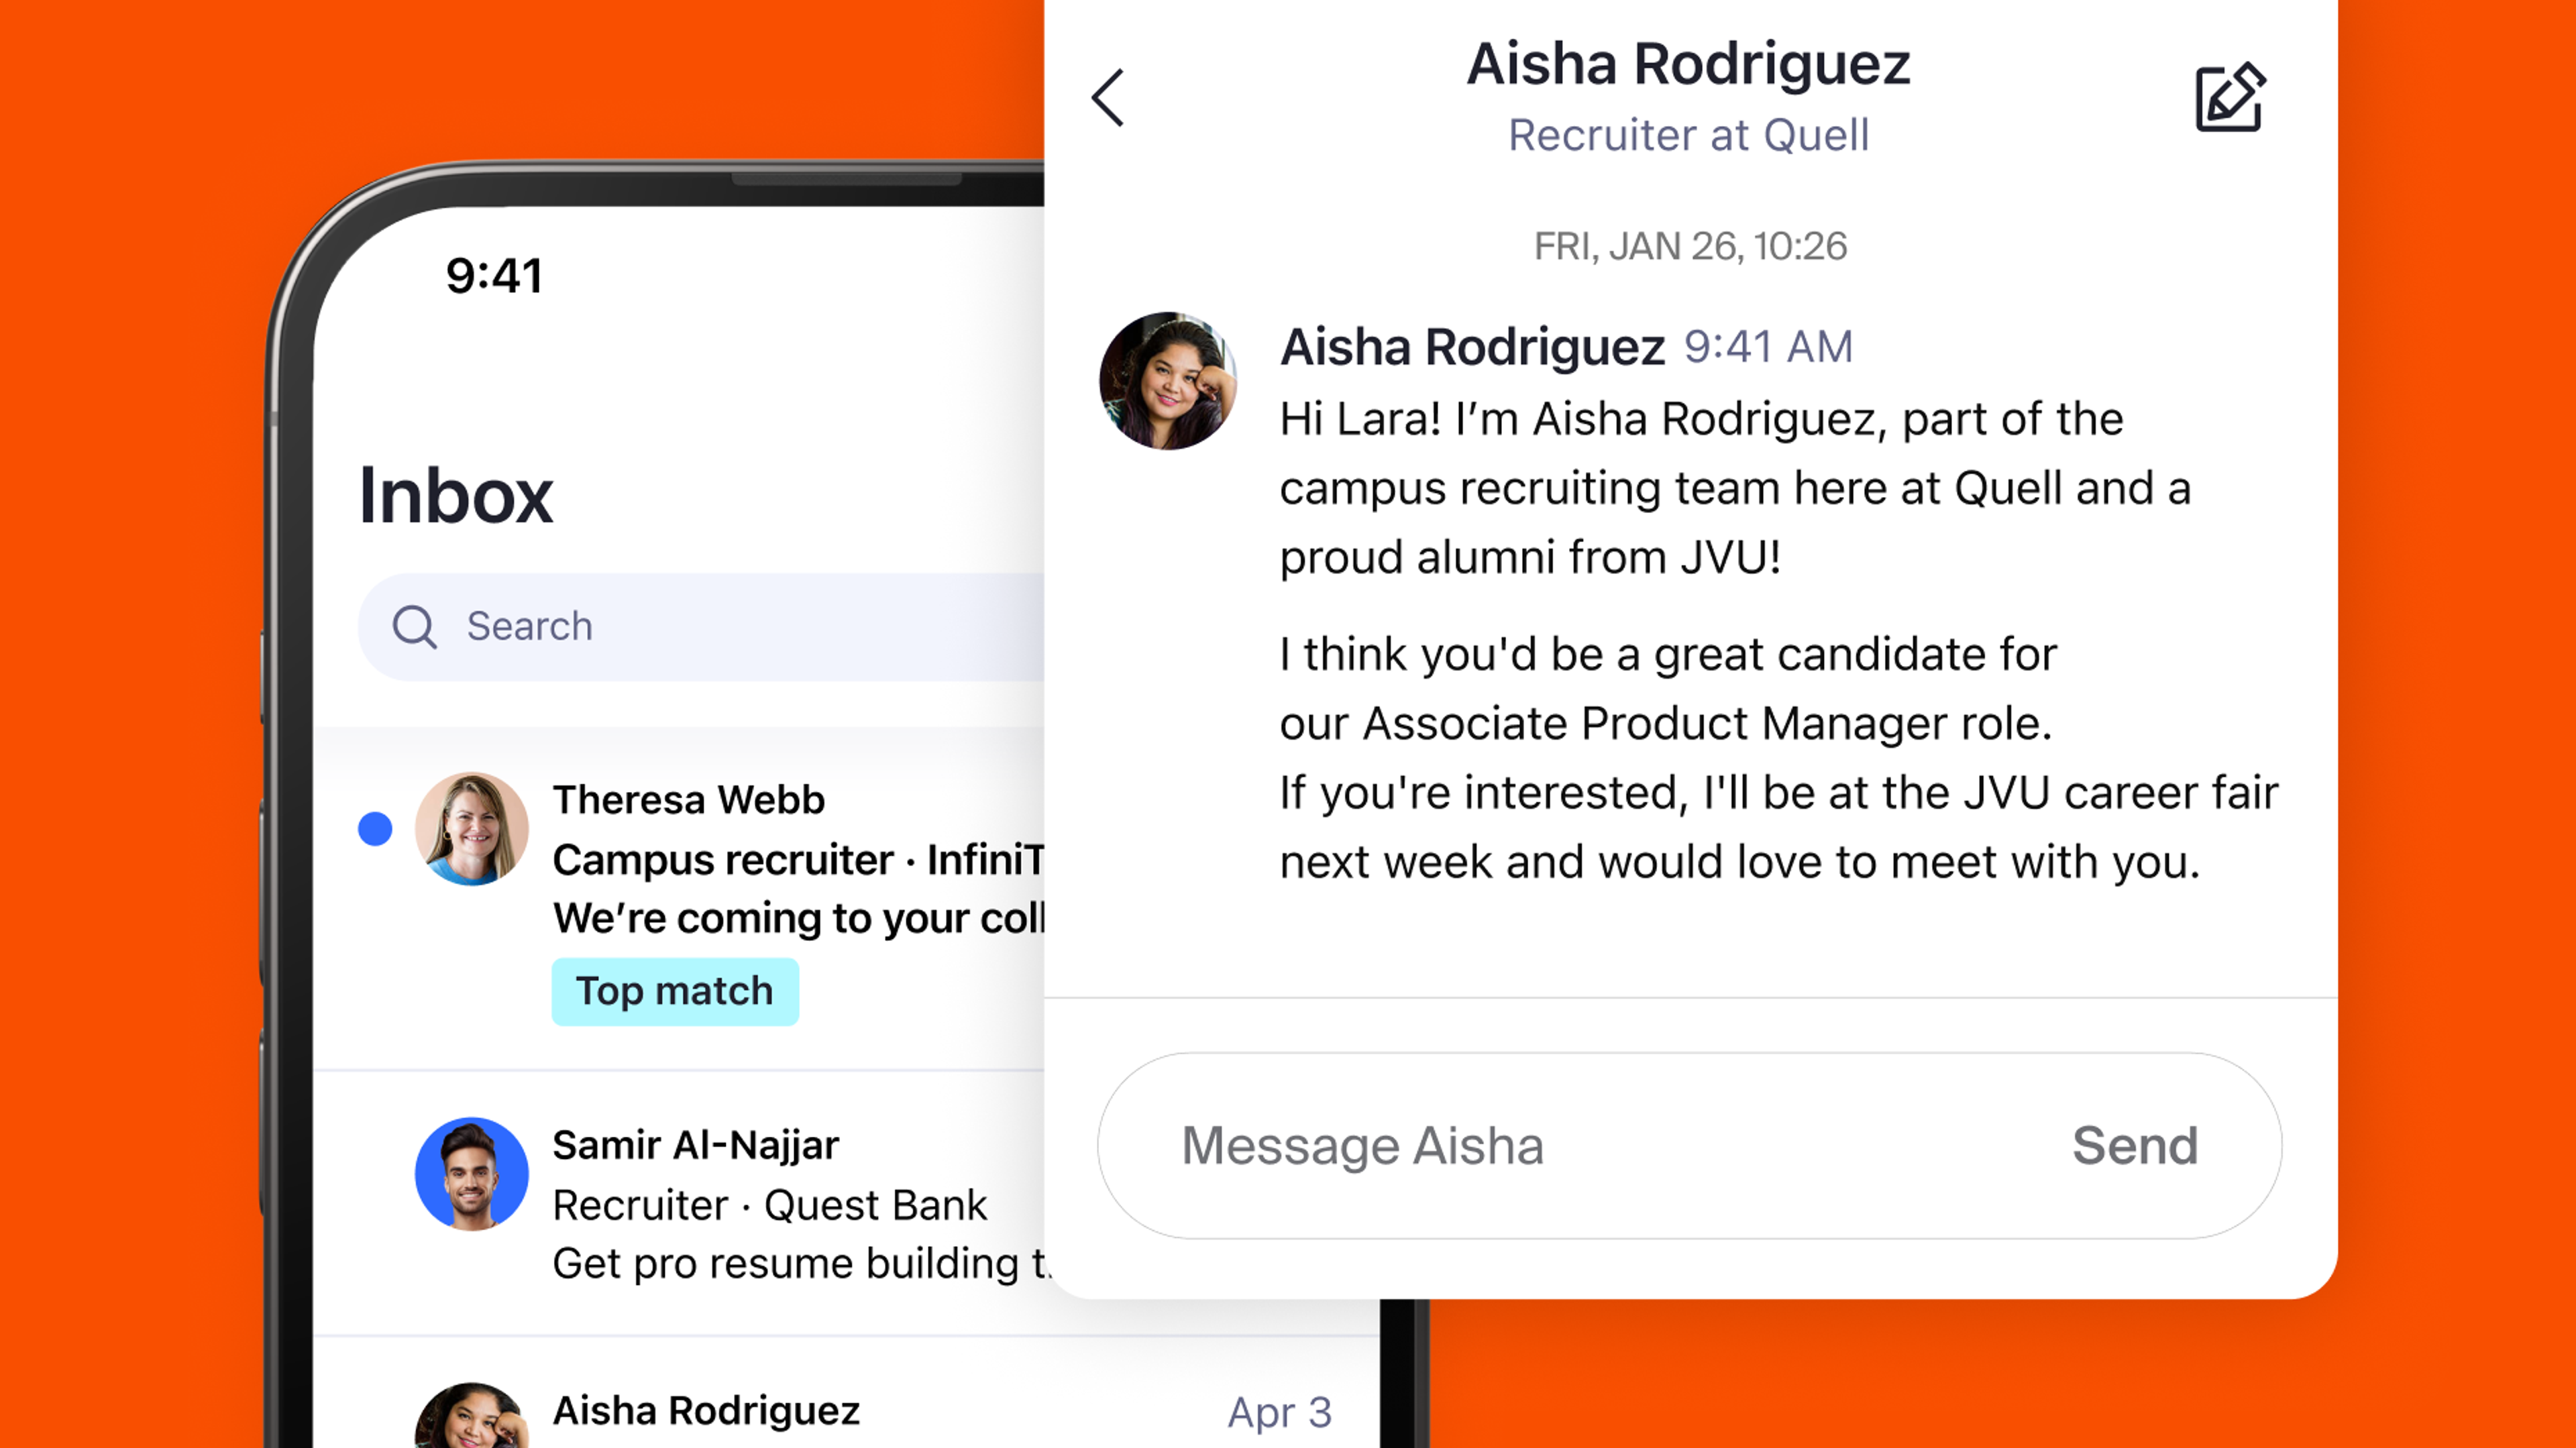 A sample message from a recruiter inviting a candidate to apply to a role is shown on a mobile phone against an orange backdrop